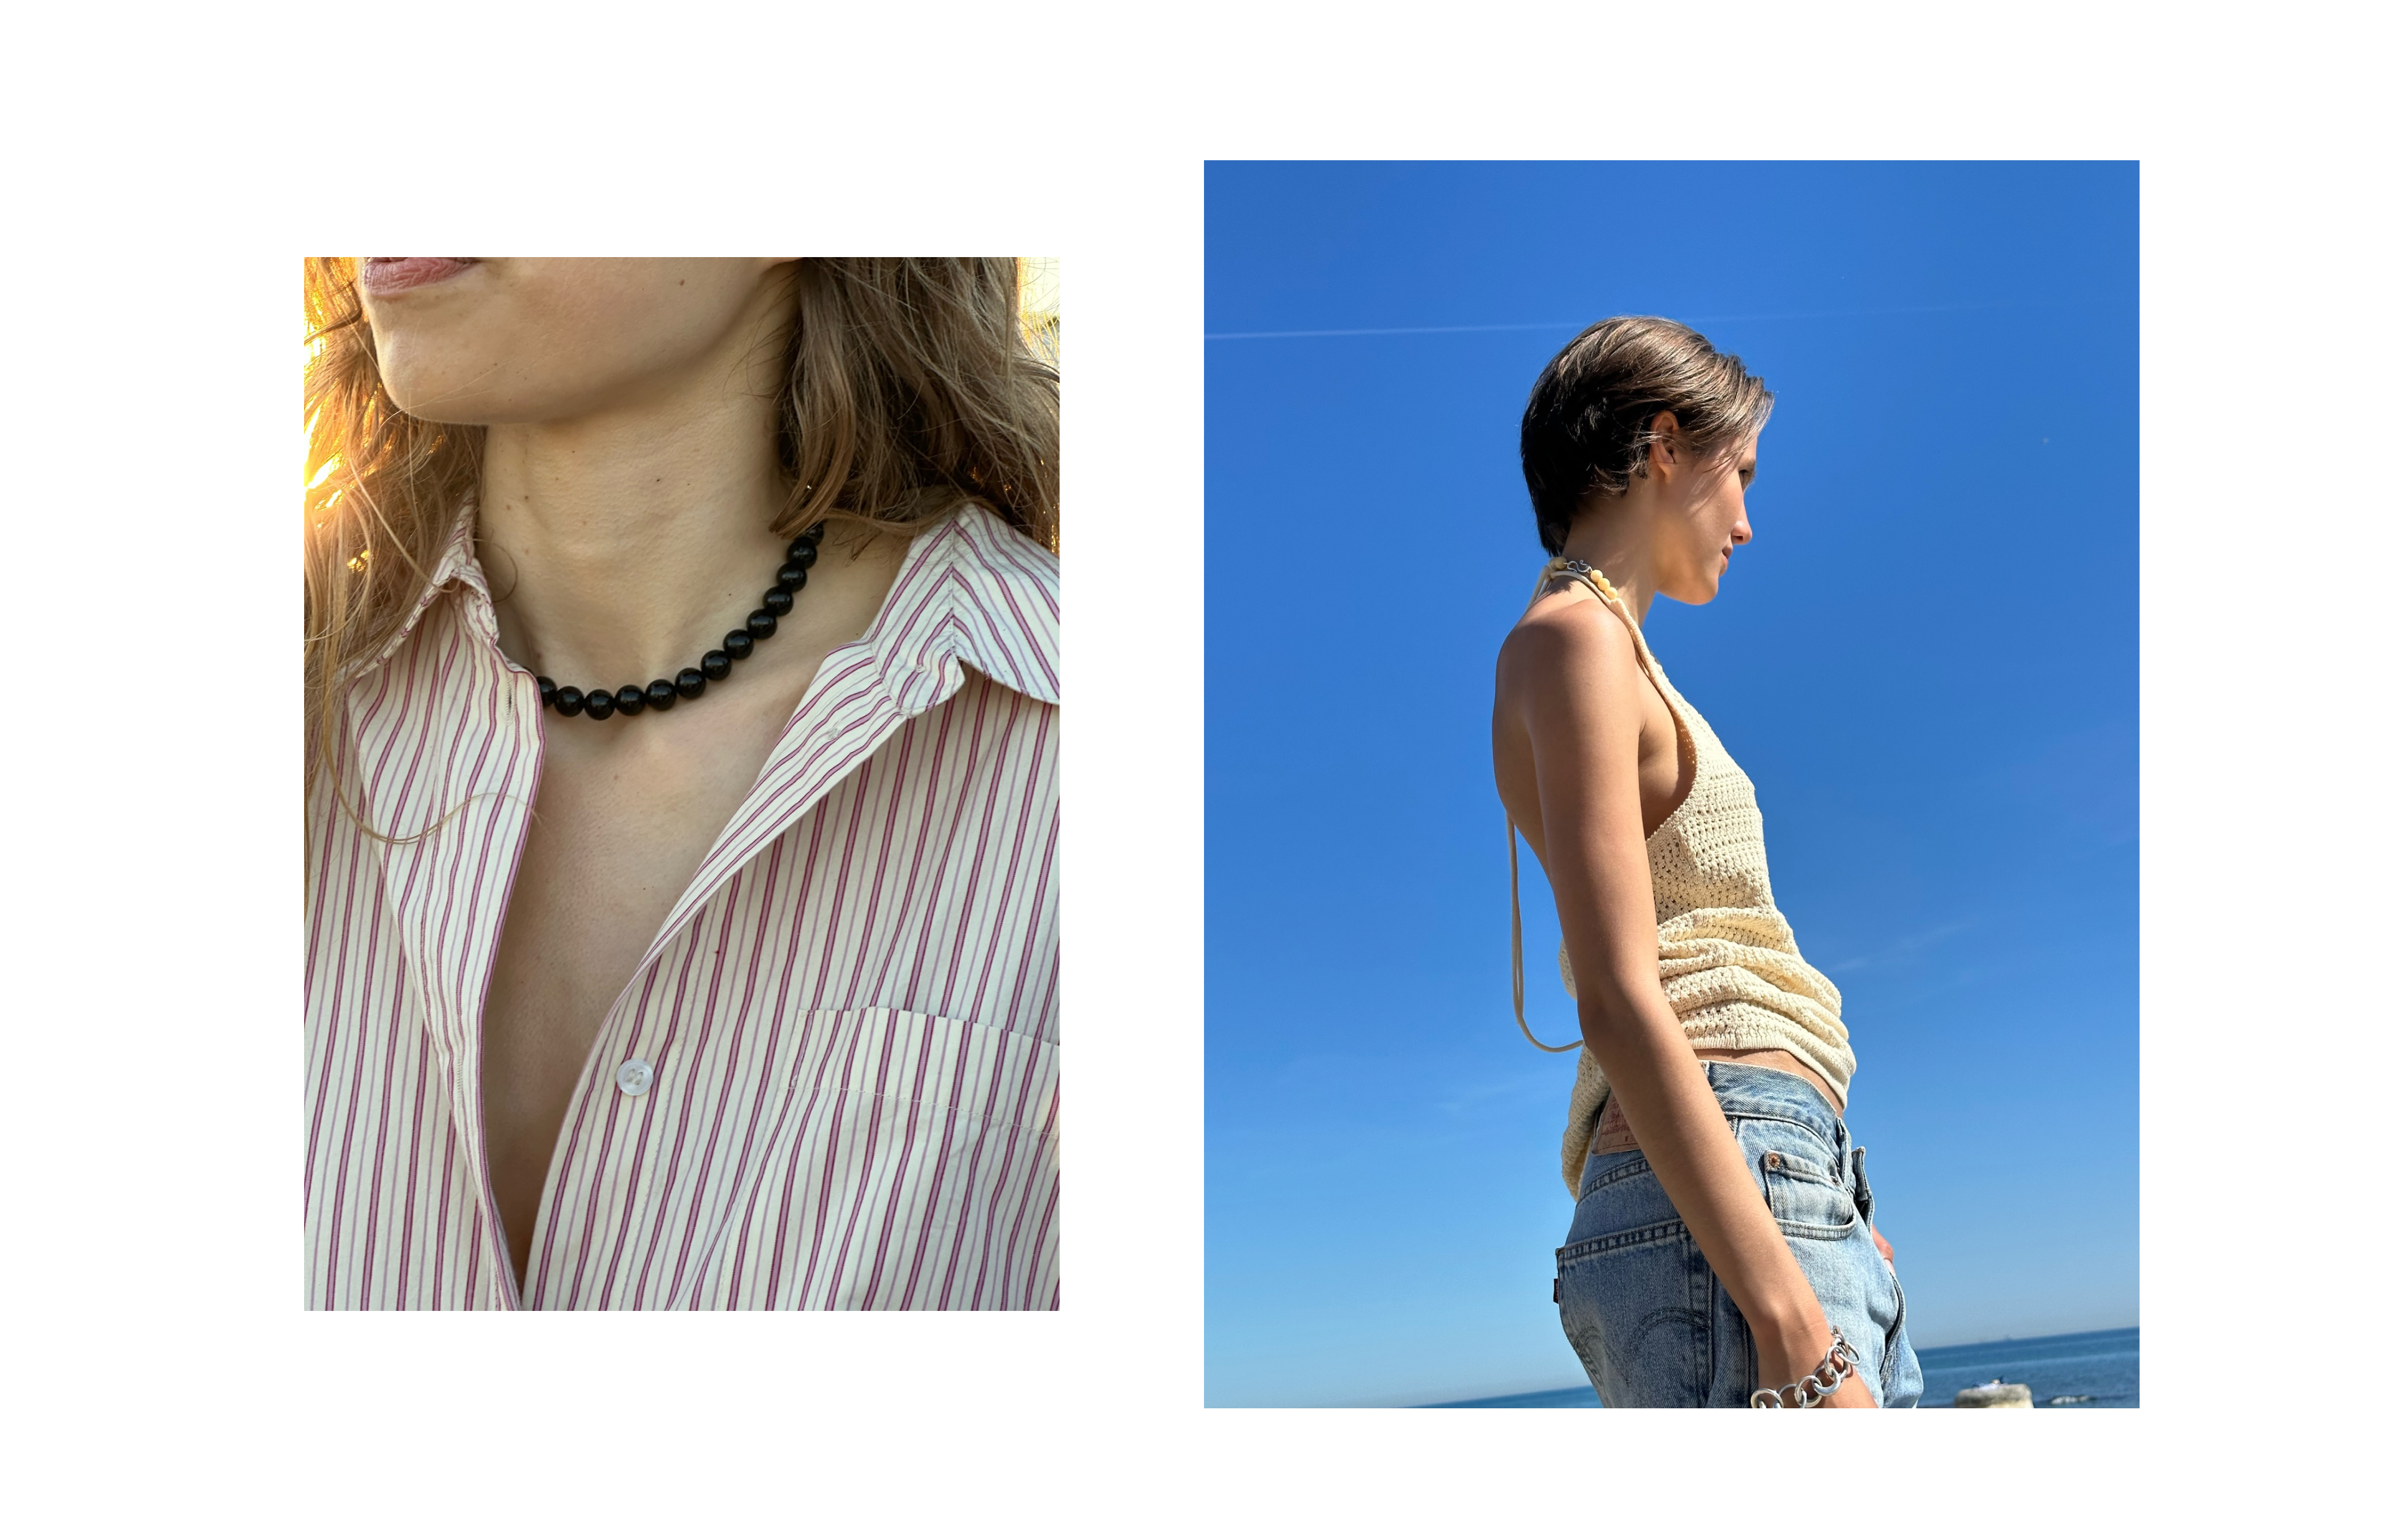 Sabine wearing the Selma Necklace and Mikkeline wearing the Zoe Necklace 